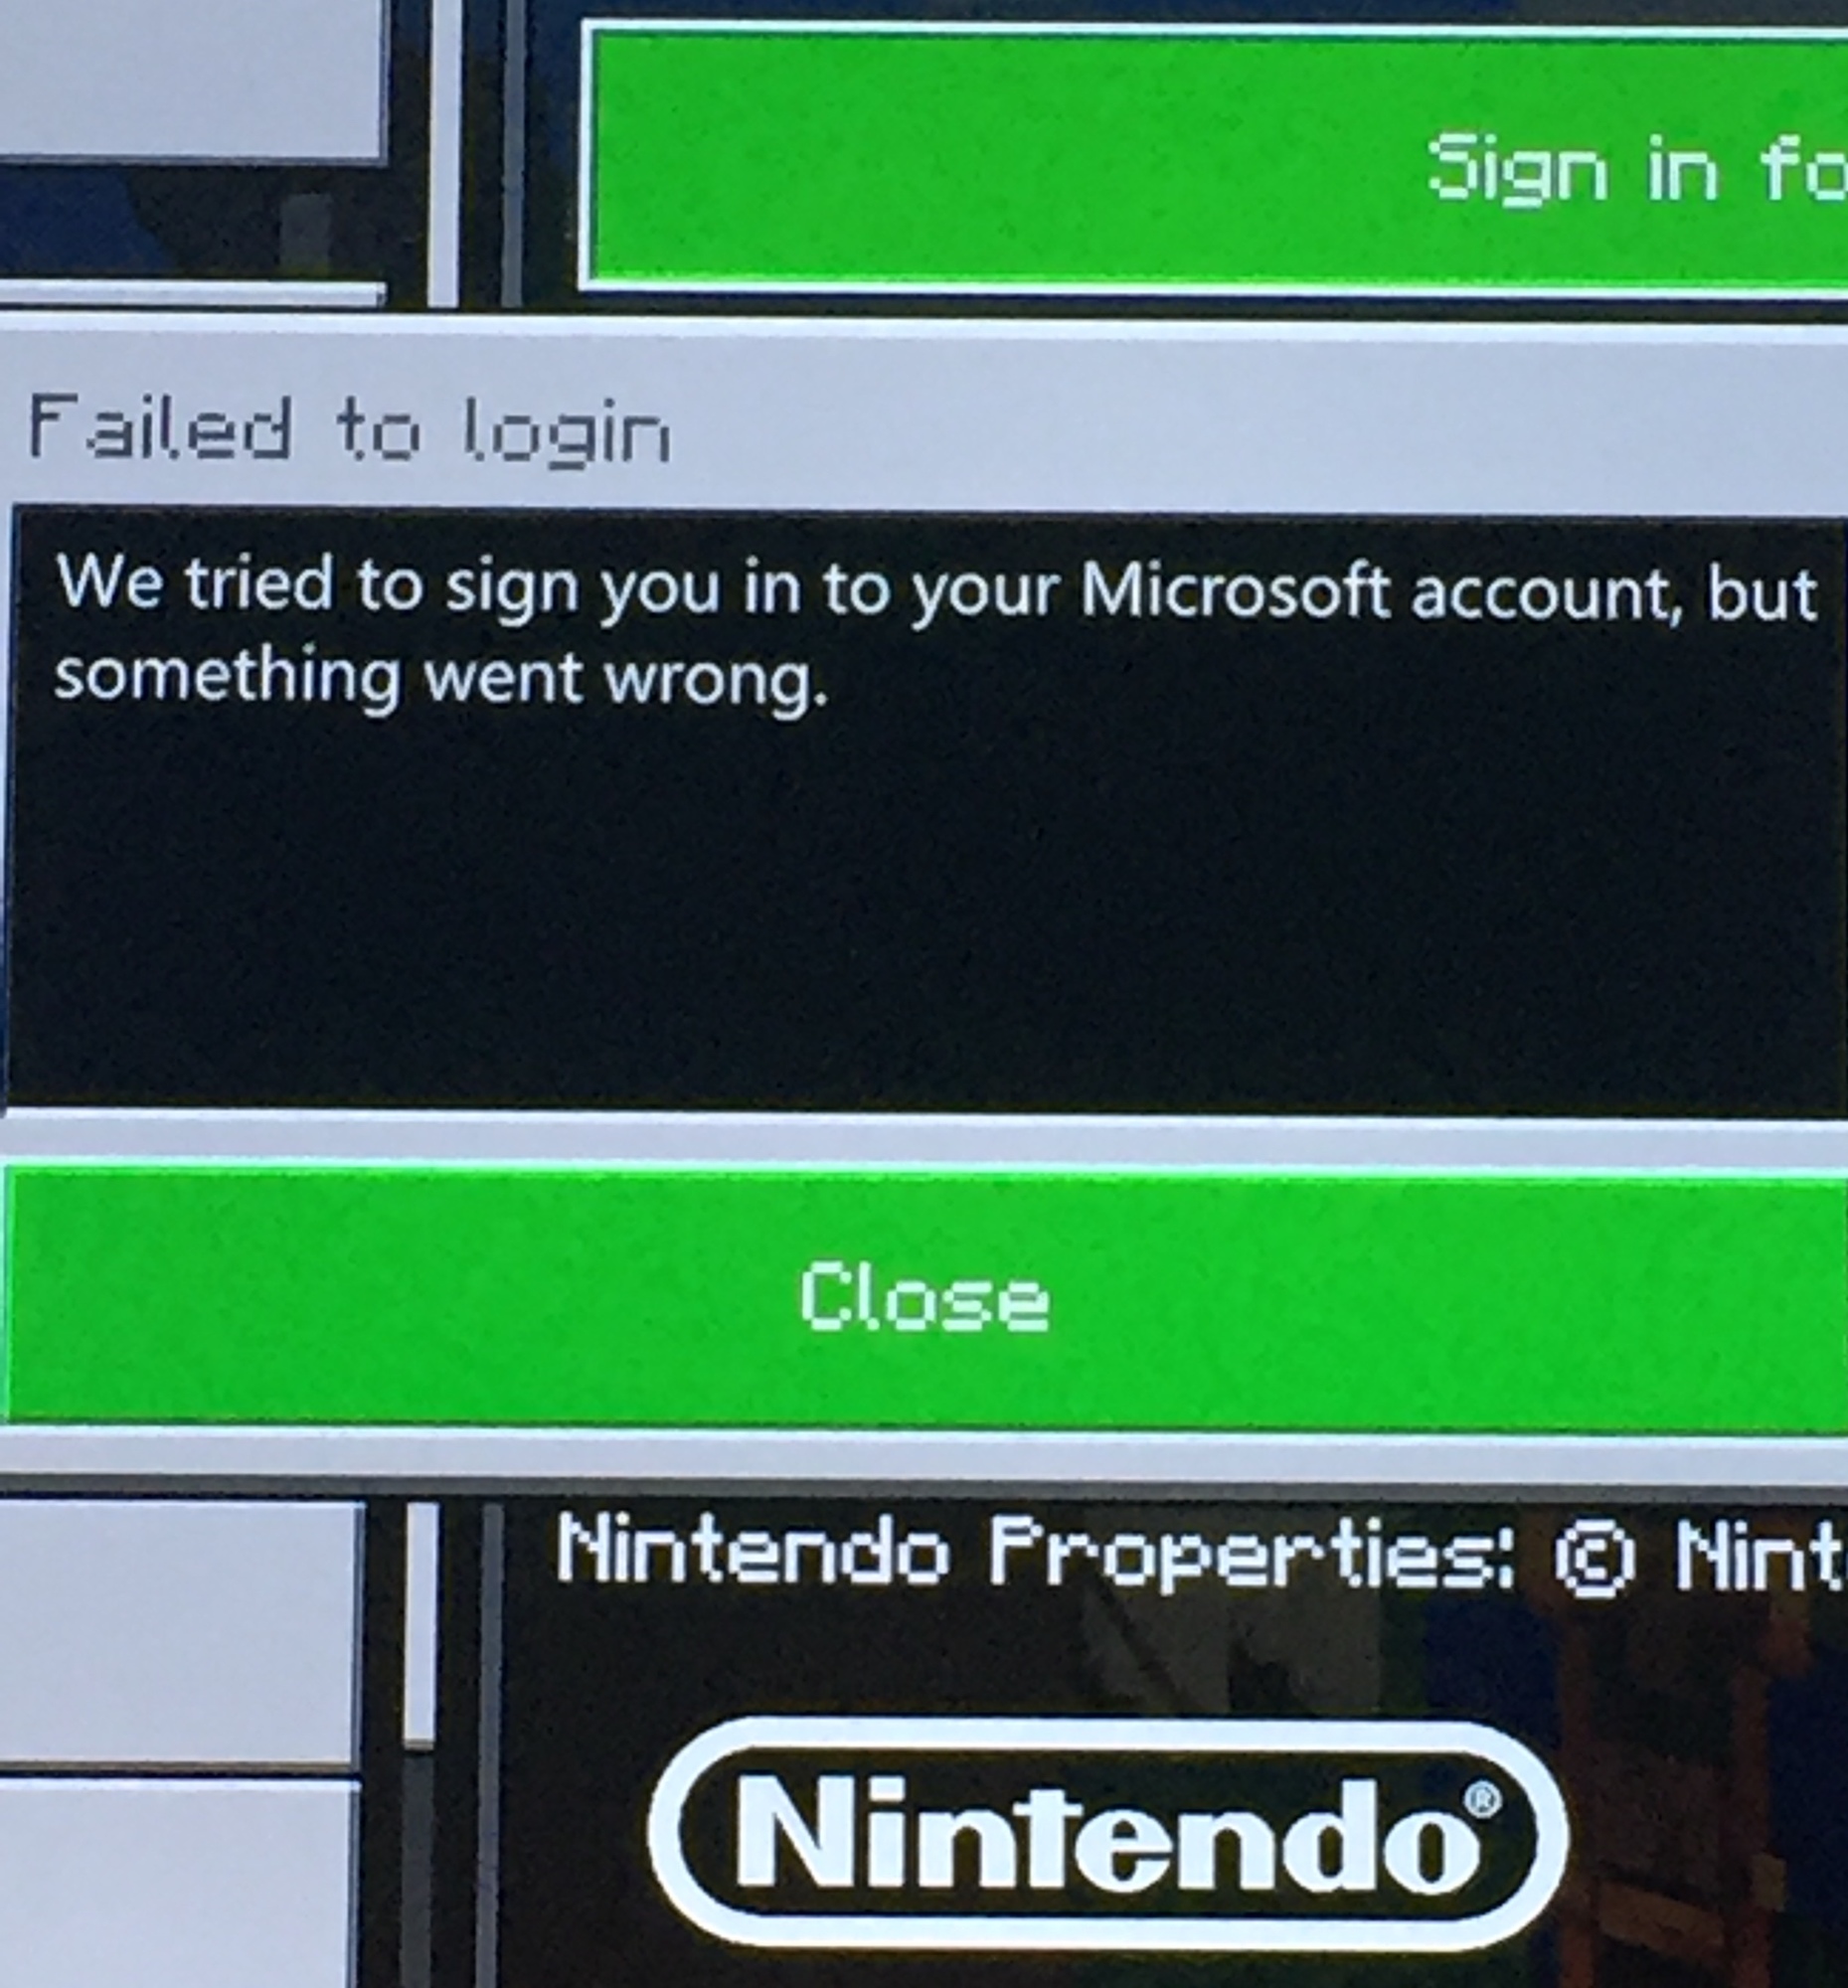 Unable to log in to Microsoft account on Minecraft for Nintendo Switch 017f3813-610e-4a76-9f12-5d6b396f69f1?upload=true.jpg